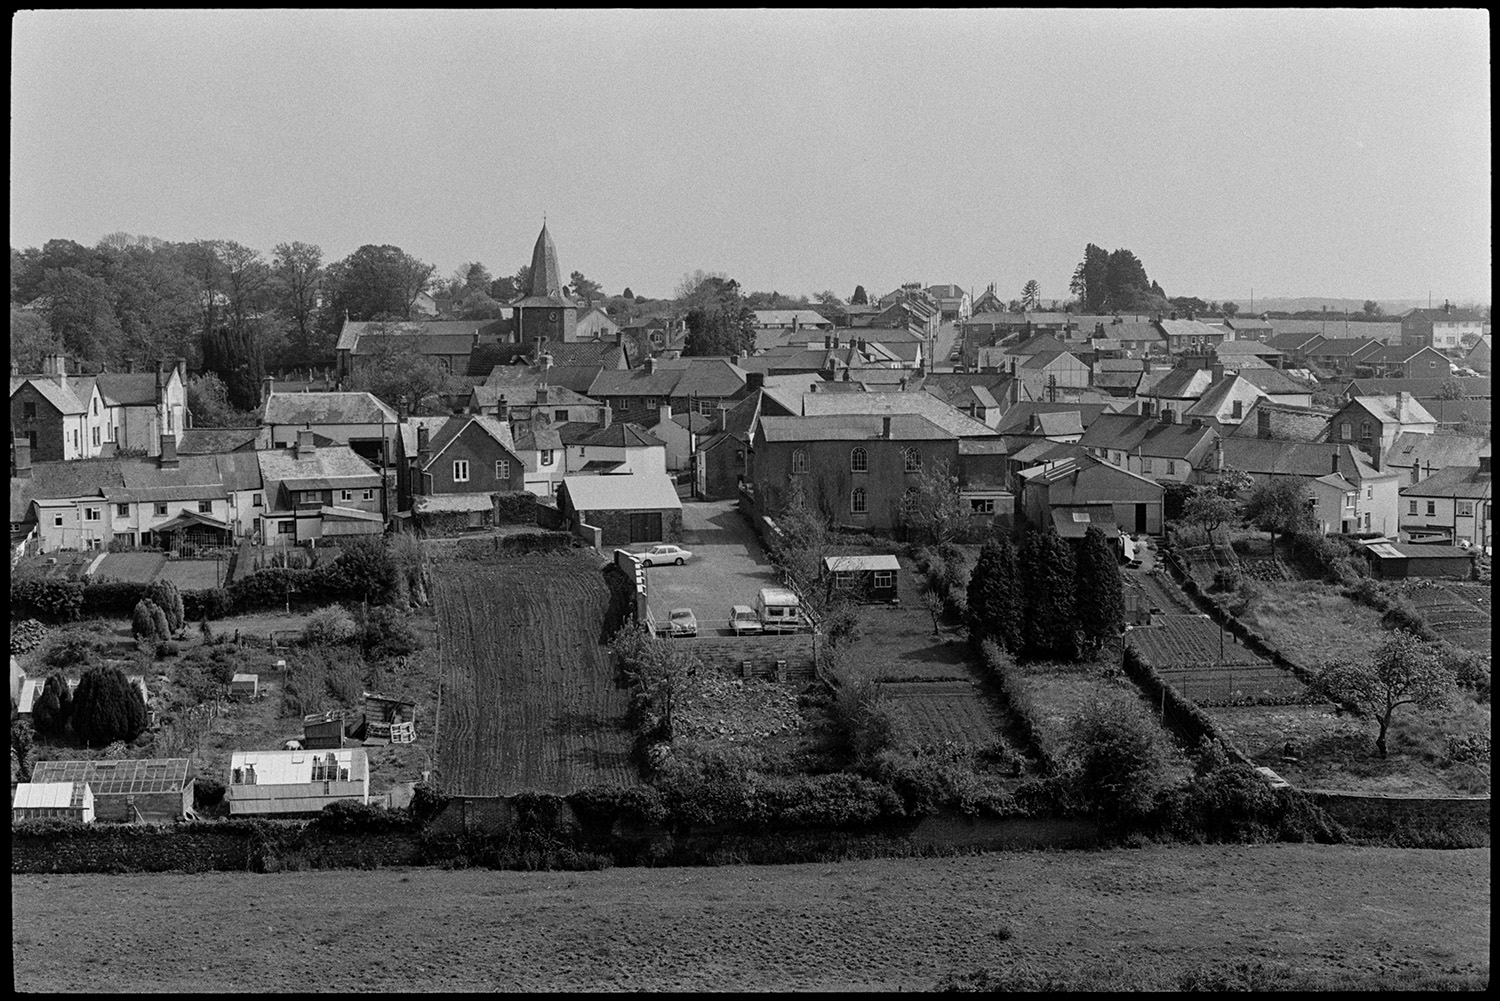 Comparison with old photo. Man gardening with town in background.
[A view of North Tawton taken from a hillside showing the town buildings, gardens, greenhouses and church.]